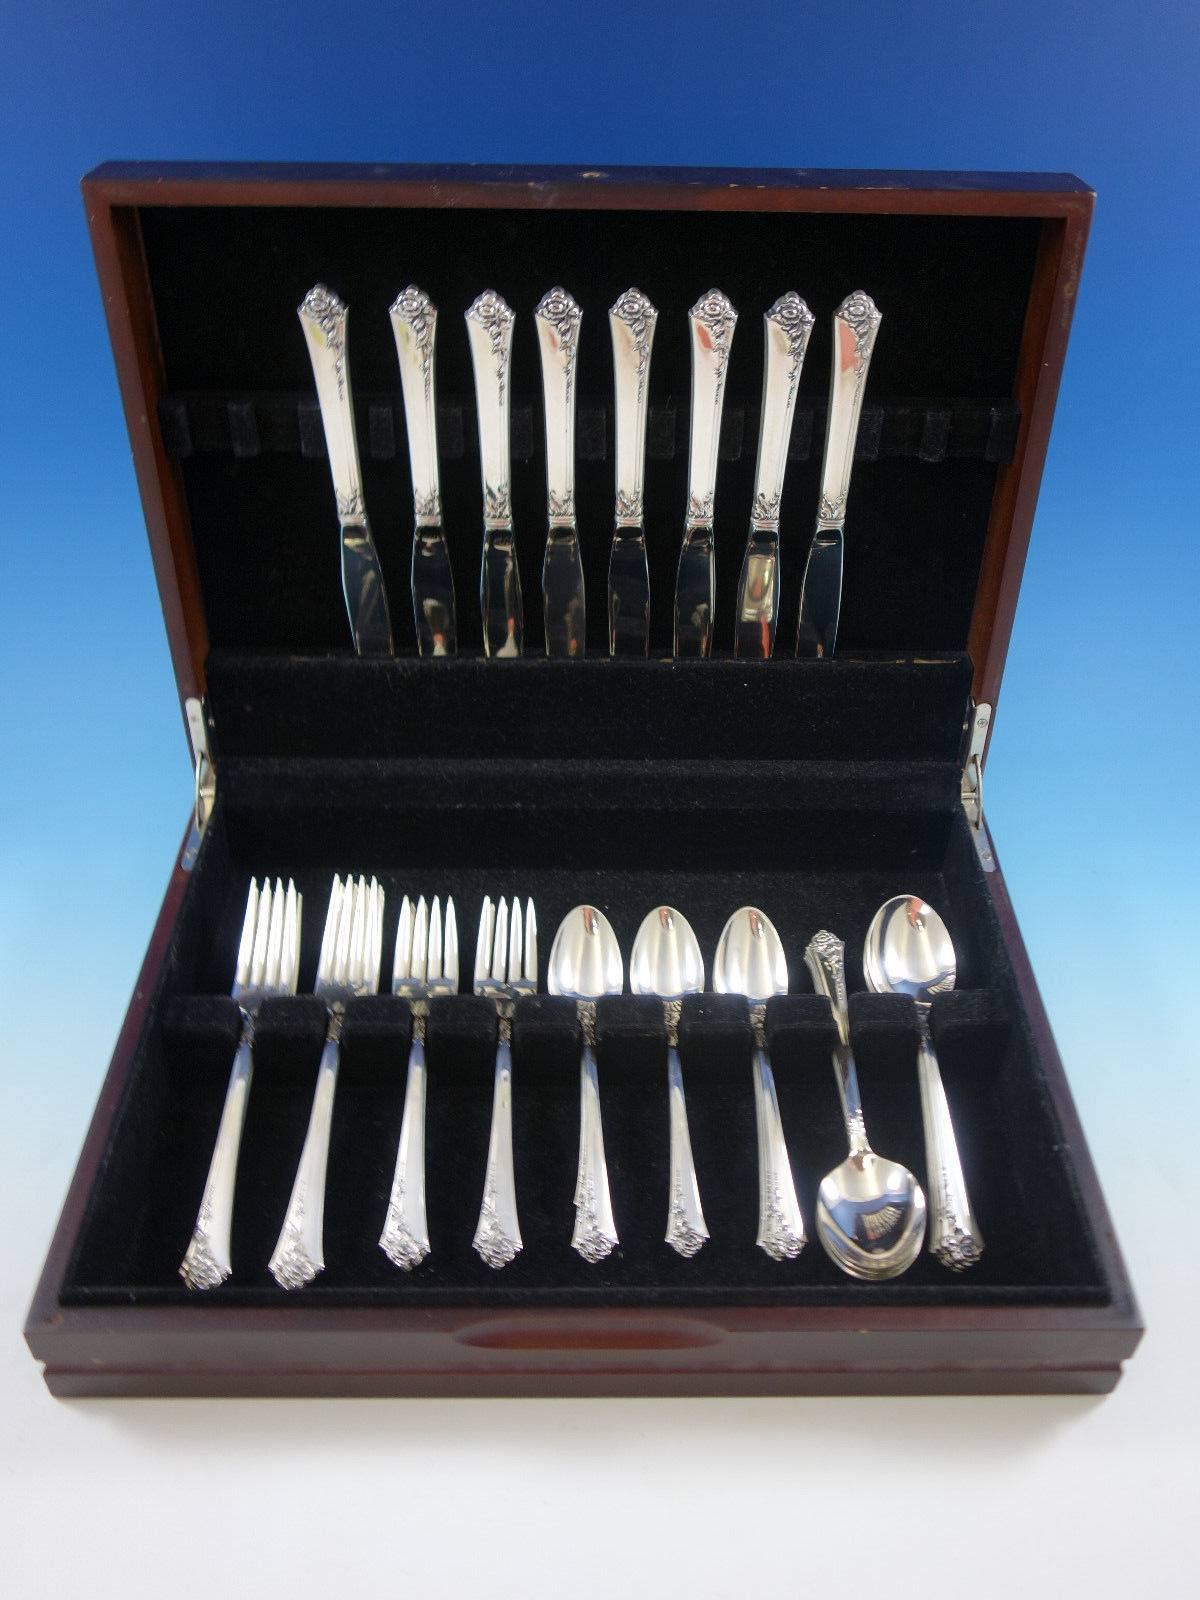 Damask Rose by Oneida sterling silver flatware set, 40 pieces. This set includes: 

eight knives, 8 3/4